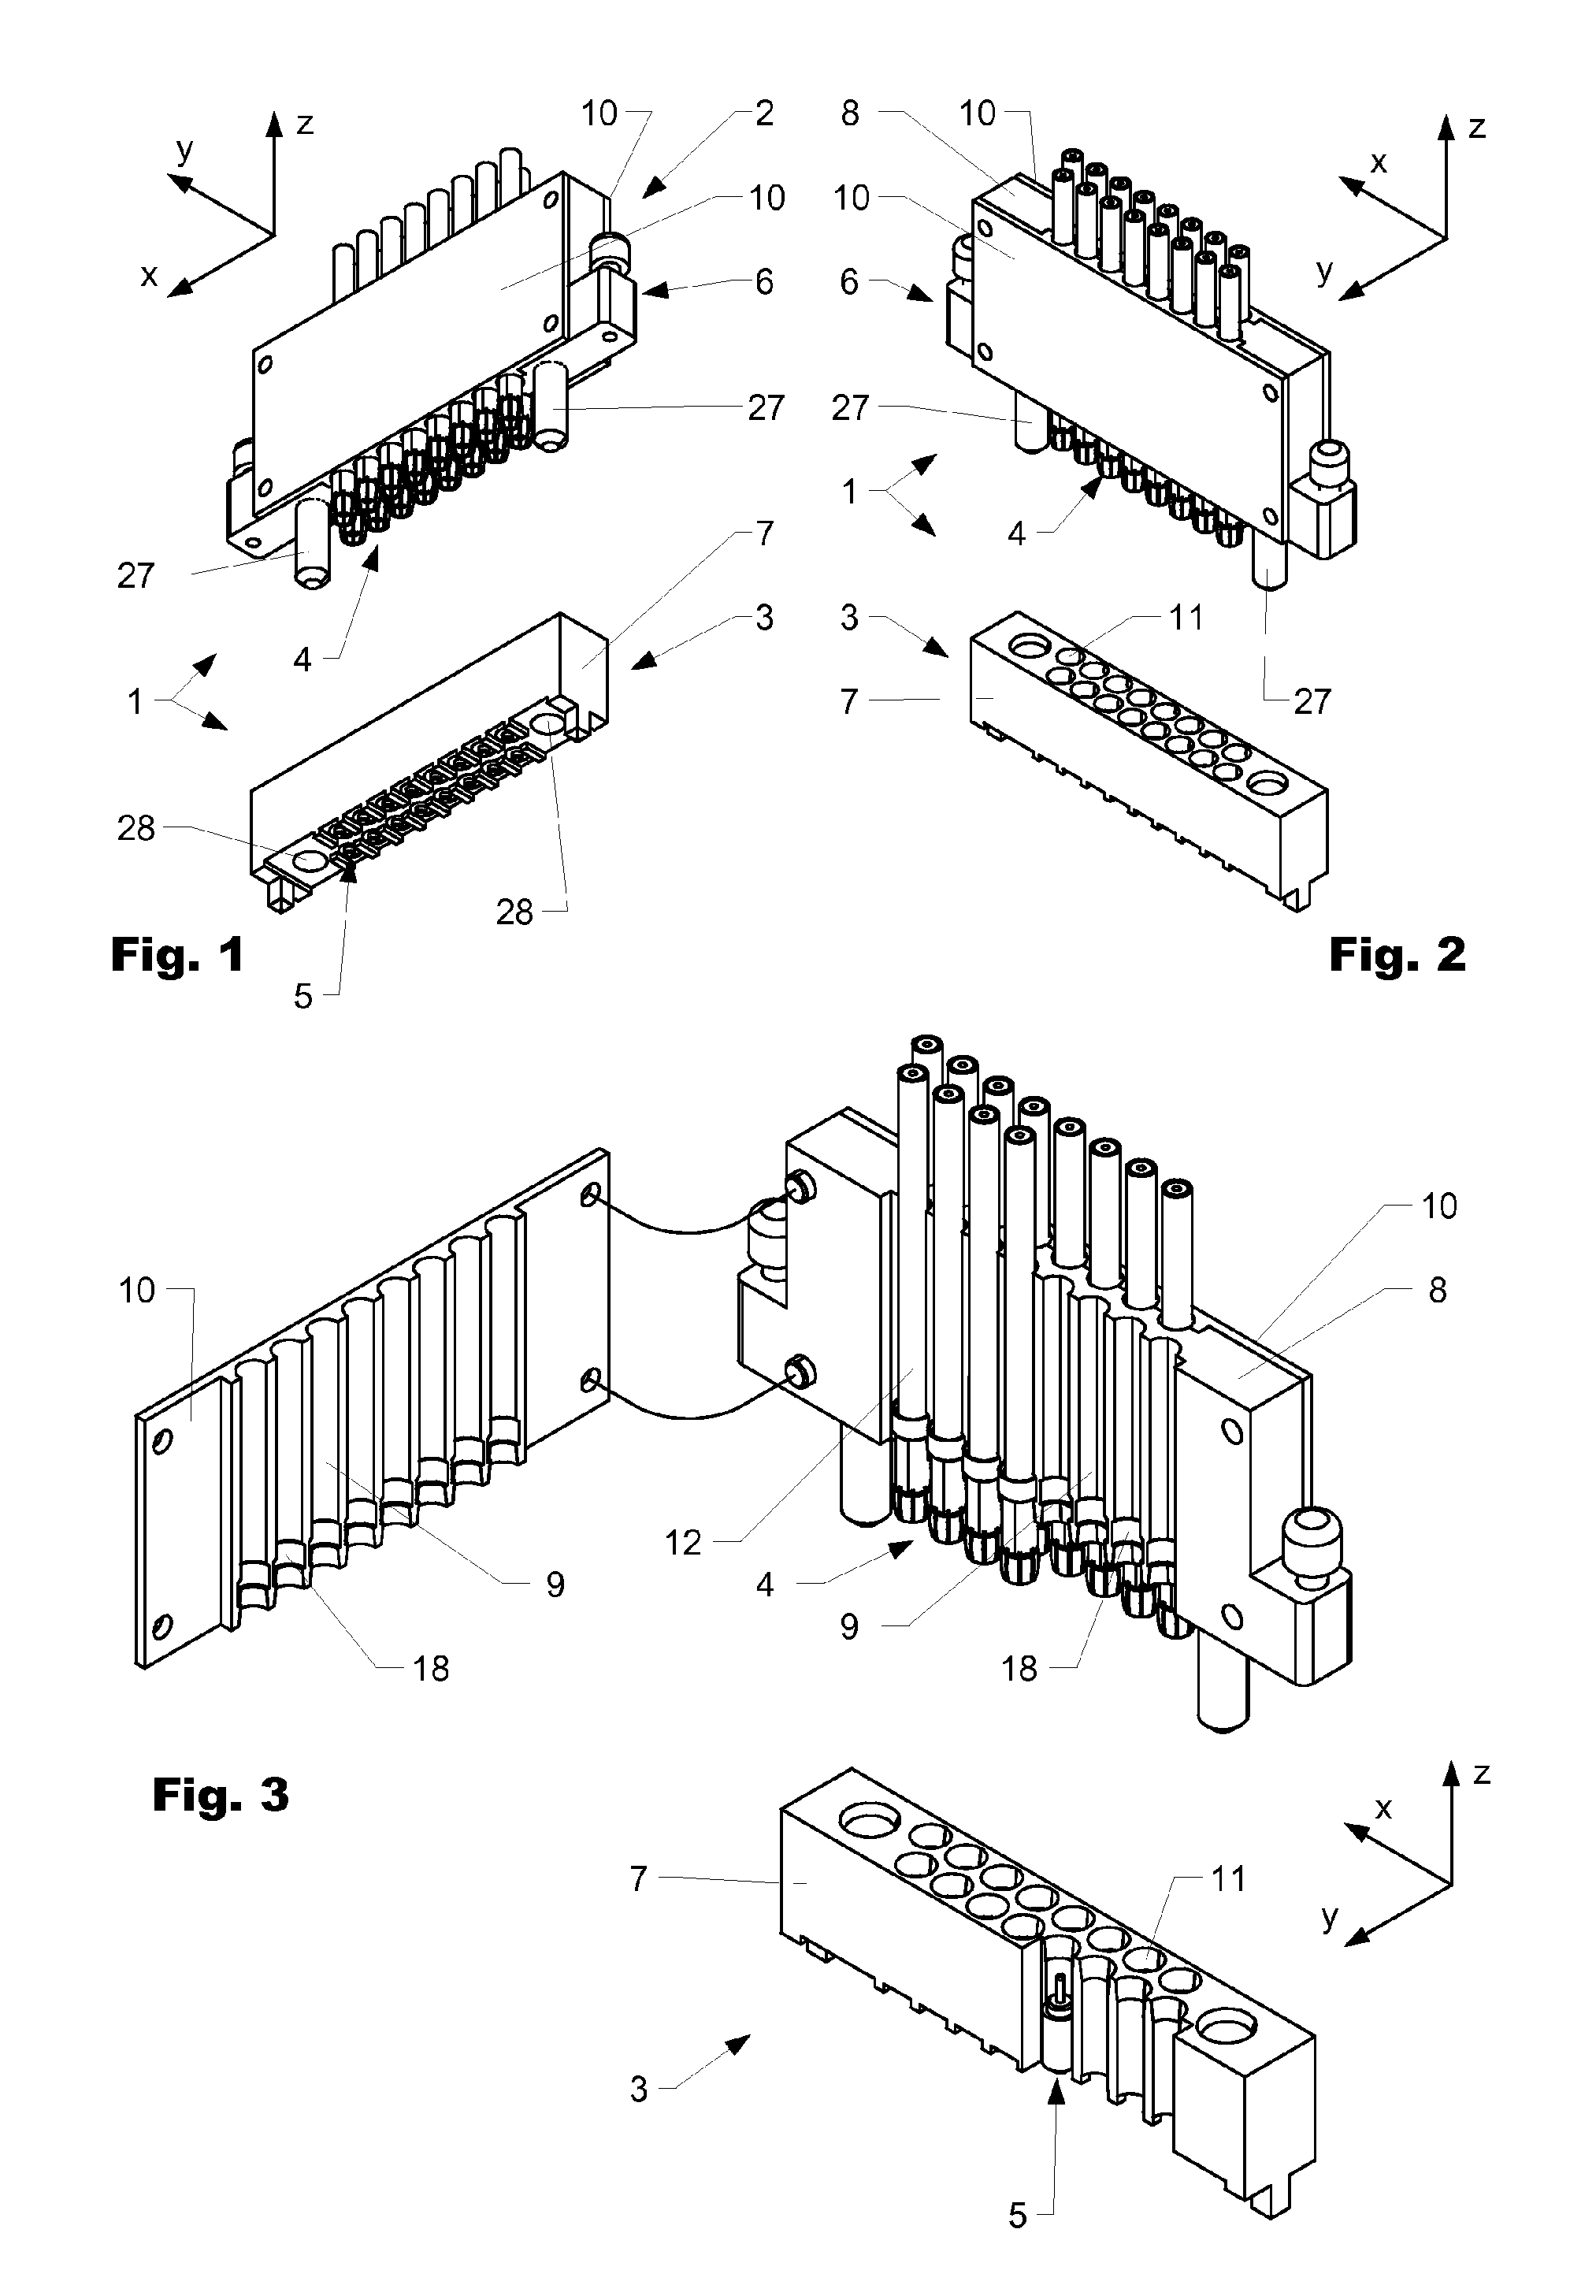 Connector banks arranged in parallel and floating manner